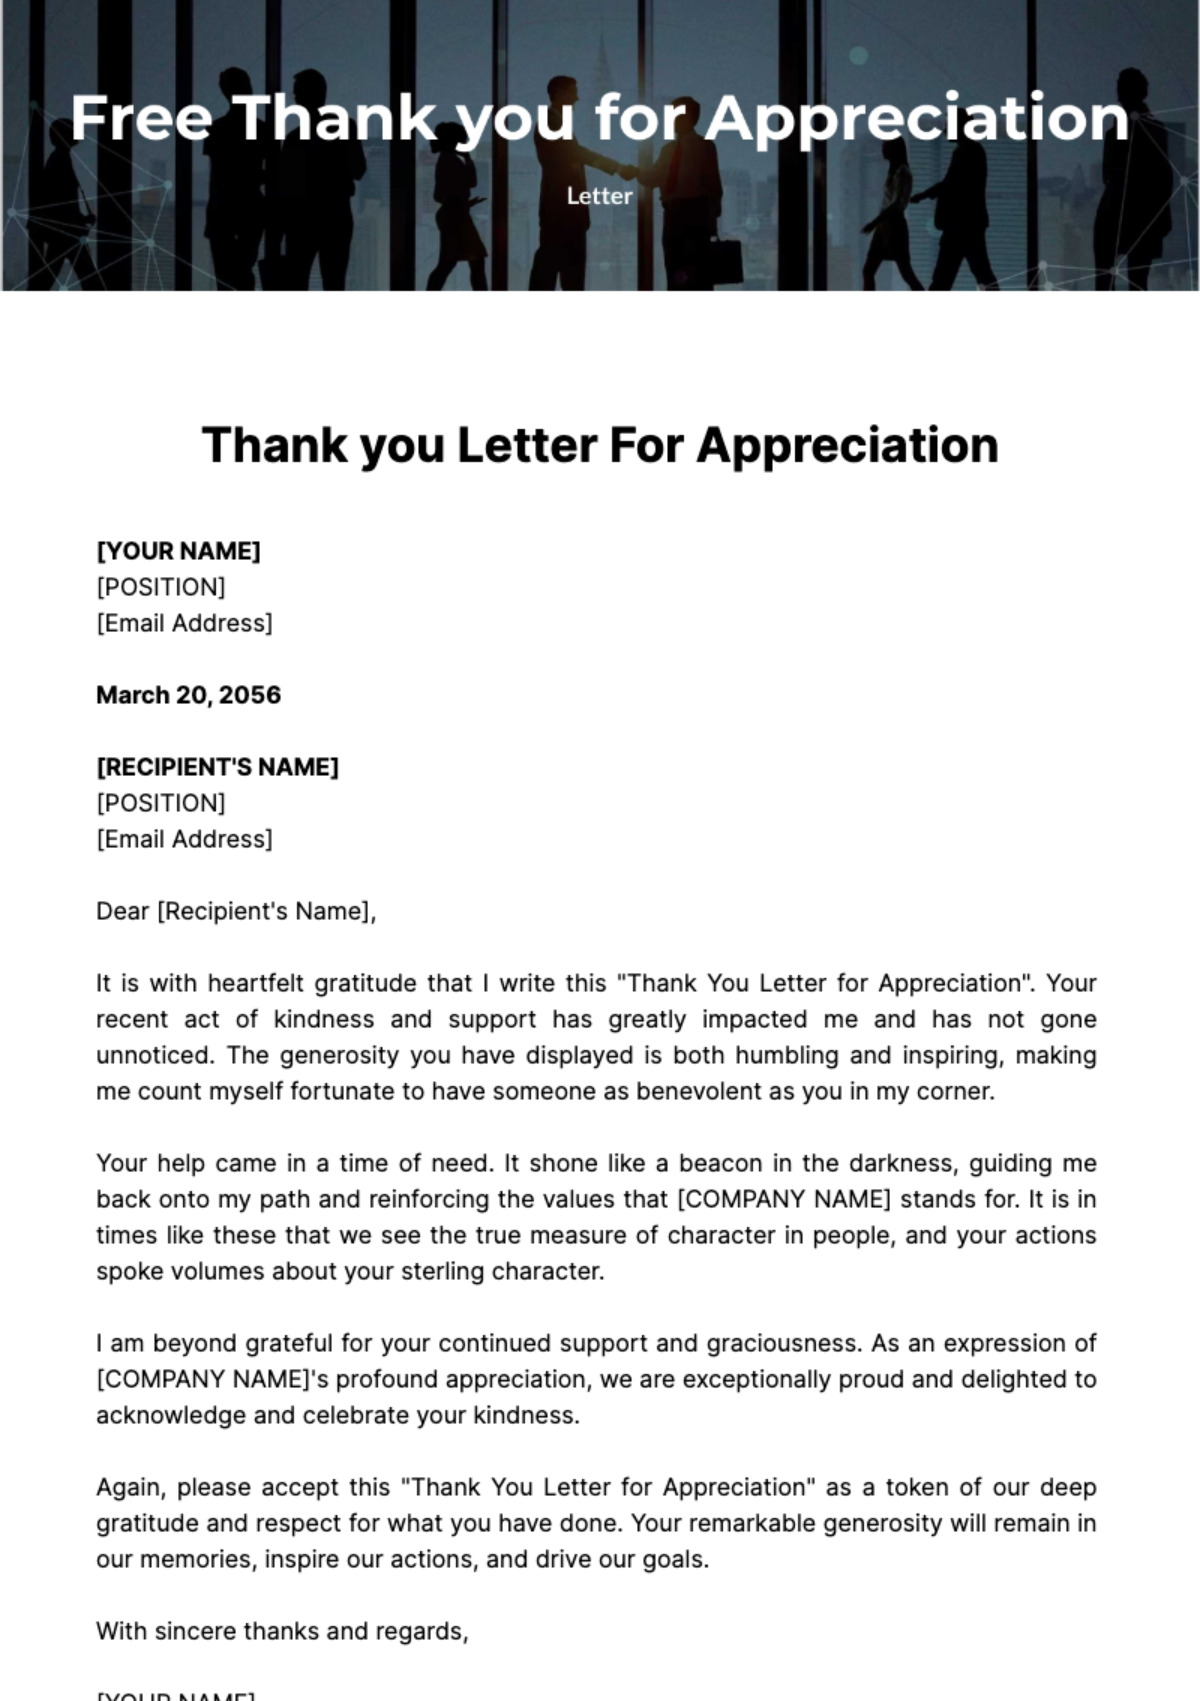 Free Thank you Letter for Appreciation Template